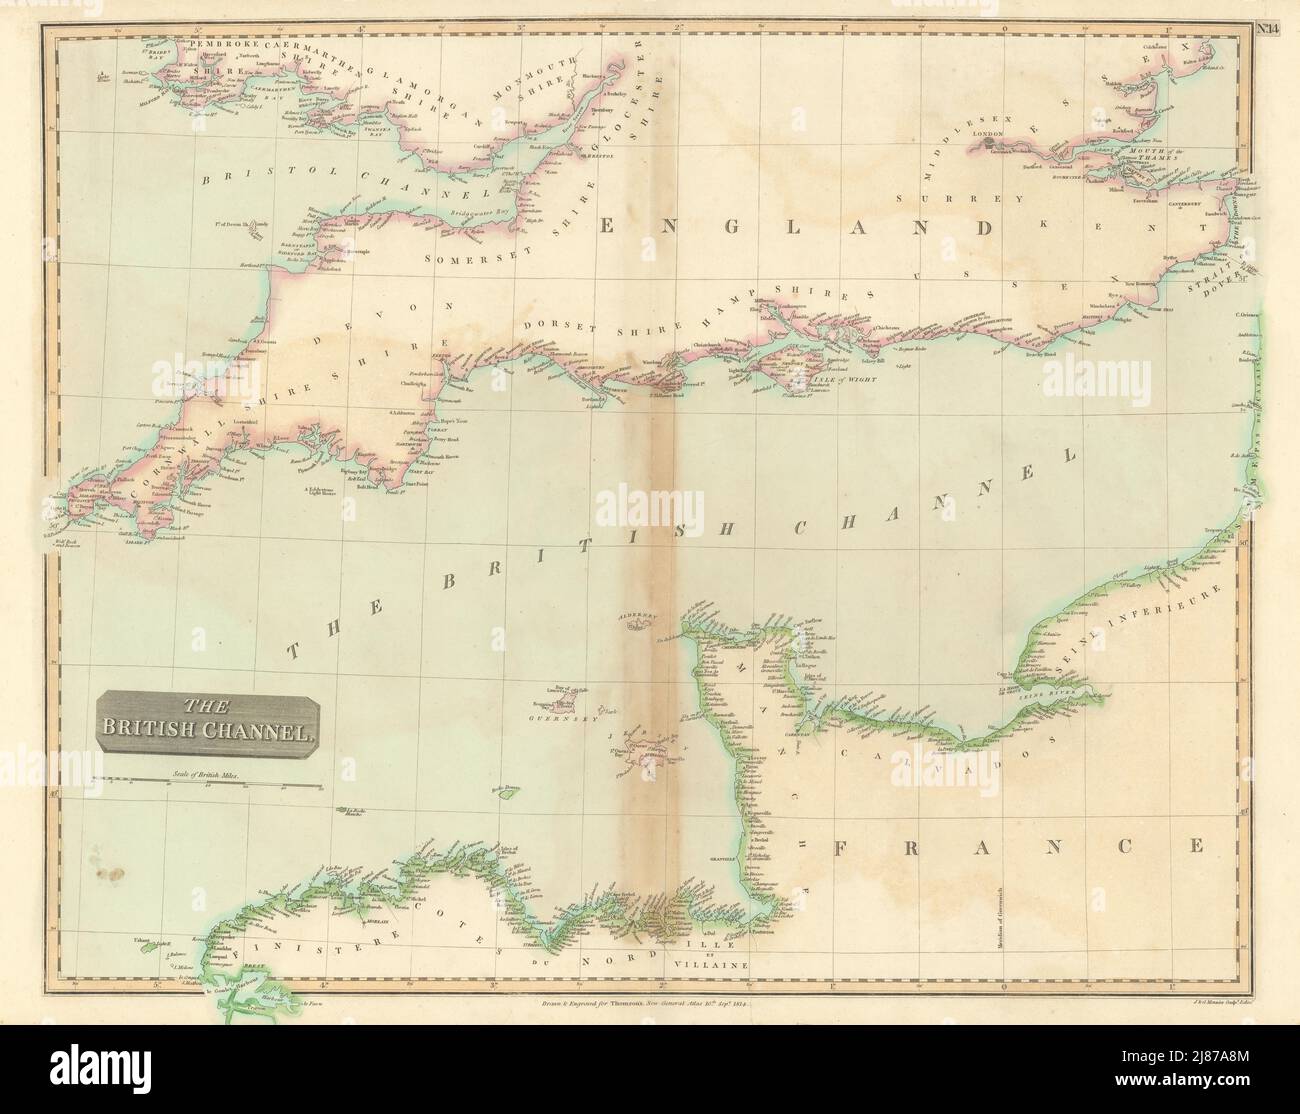 'The British Channel' by John Thomson. English Channel. Manche 1817 old map Stock Photo